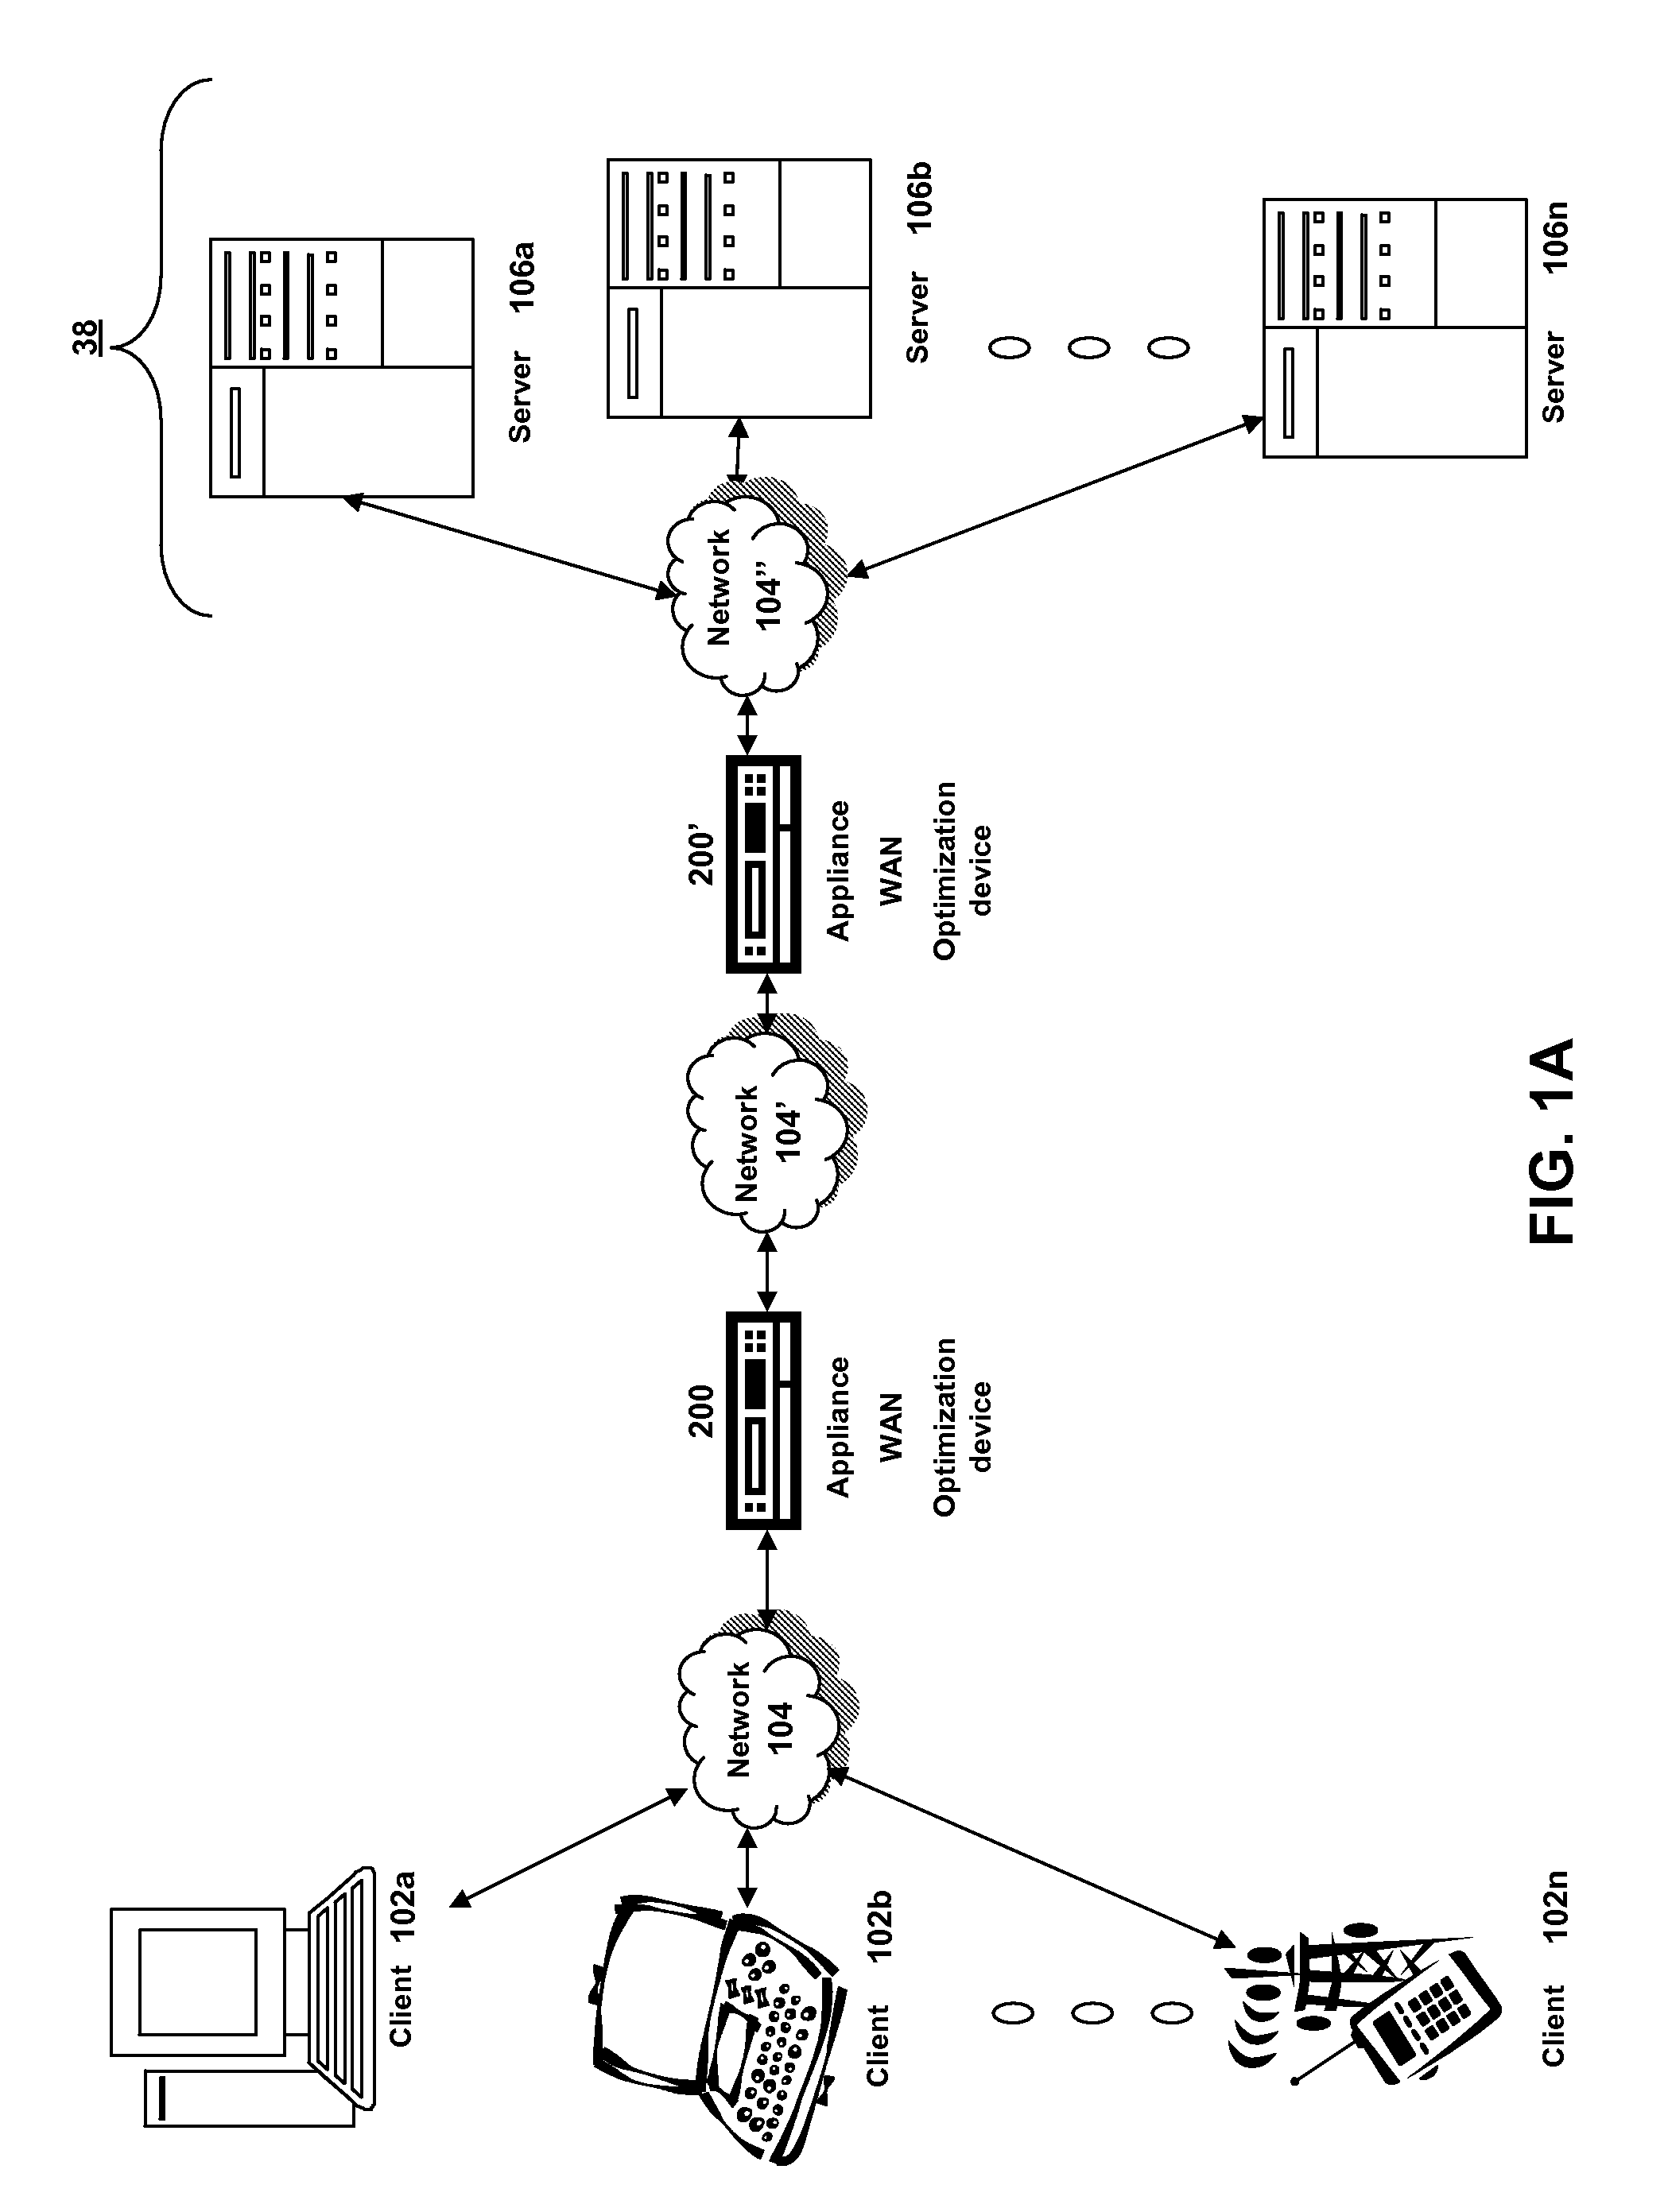 Systems and methods of using HTTP head command for prefetching